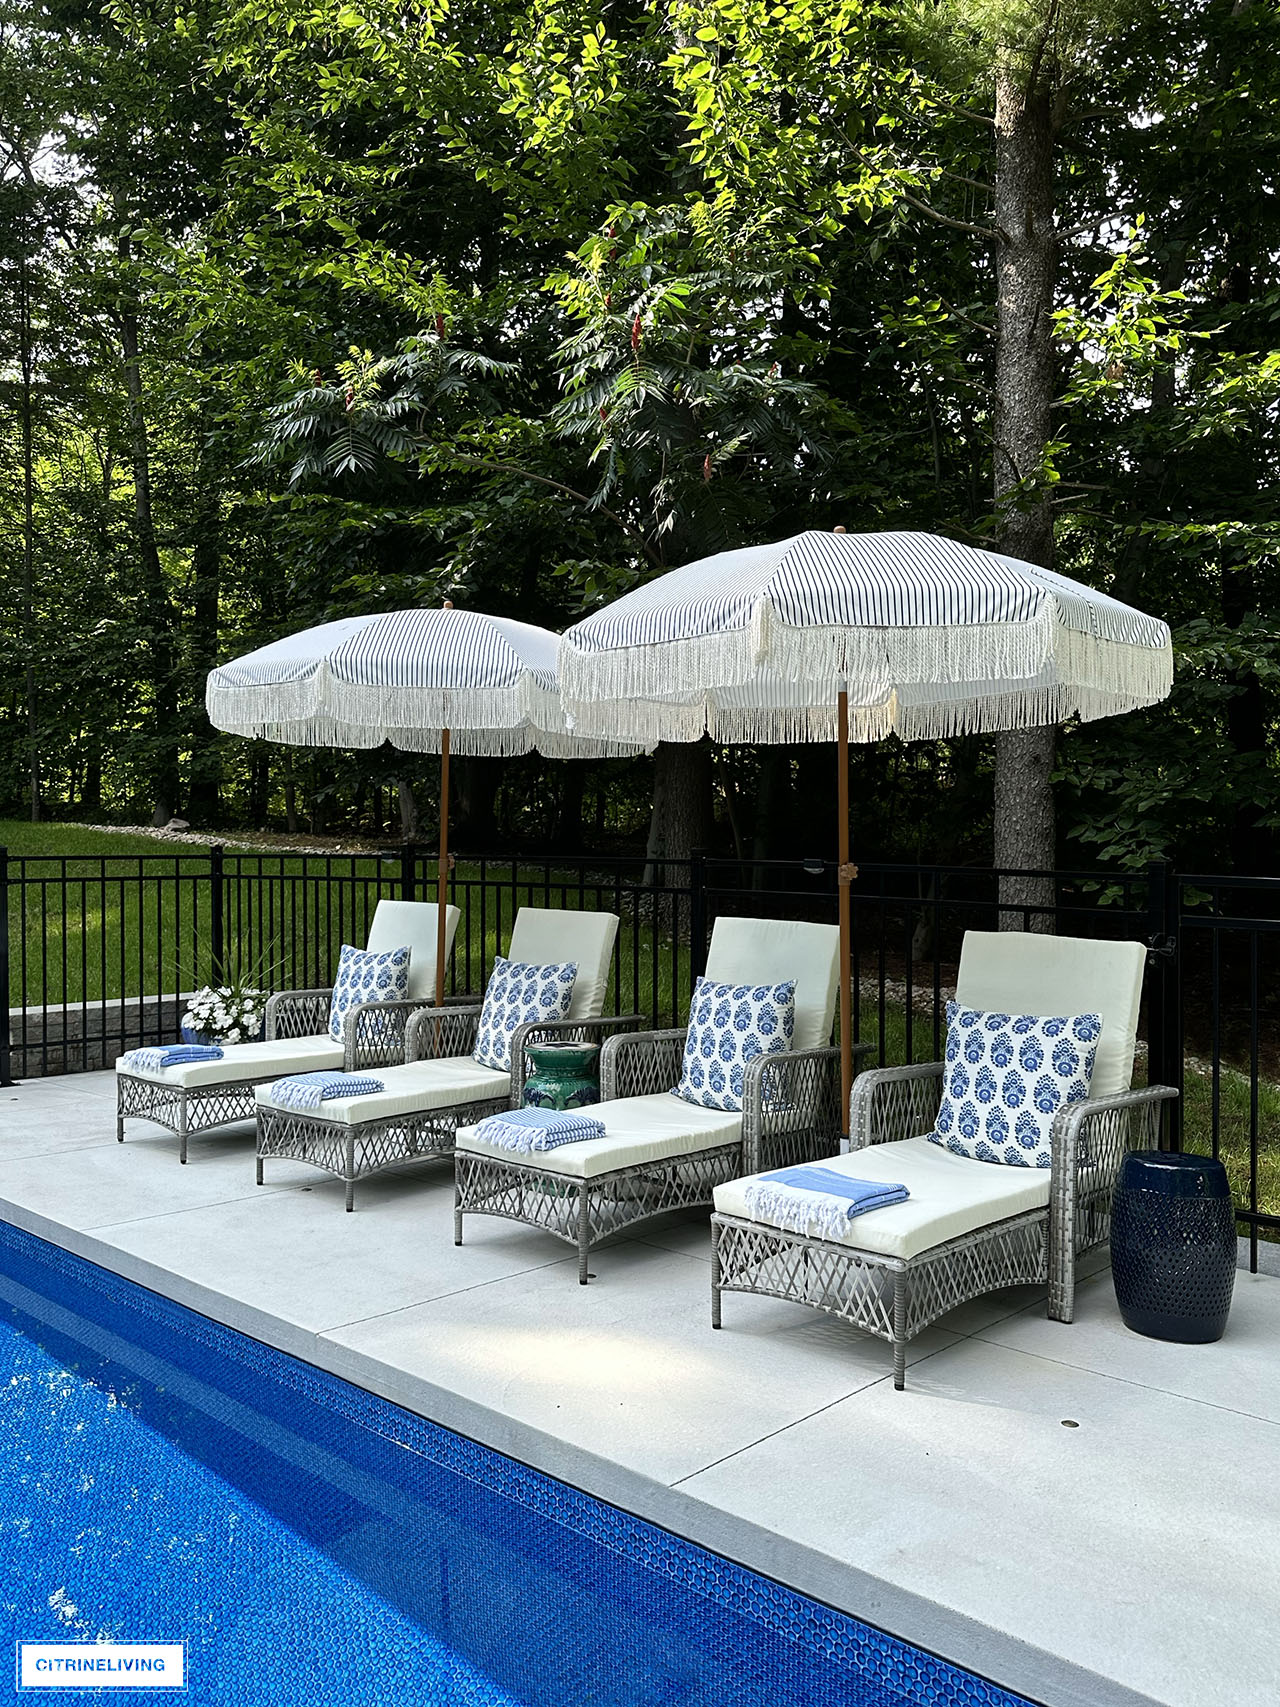 Resort style backyard with in ground pool, loungers, fringe umbrellas